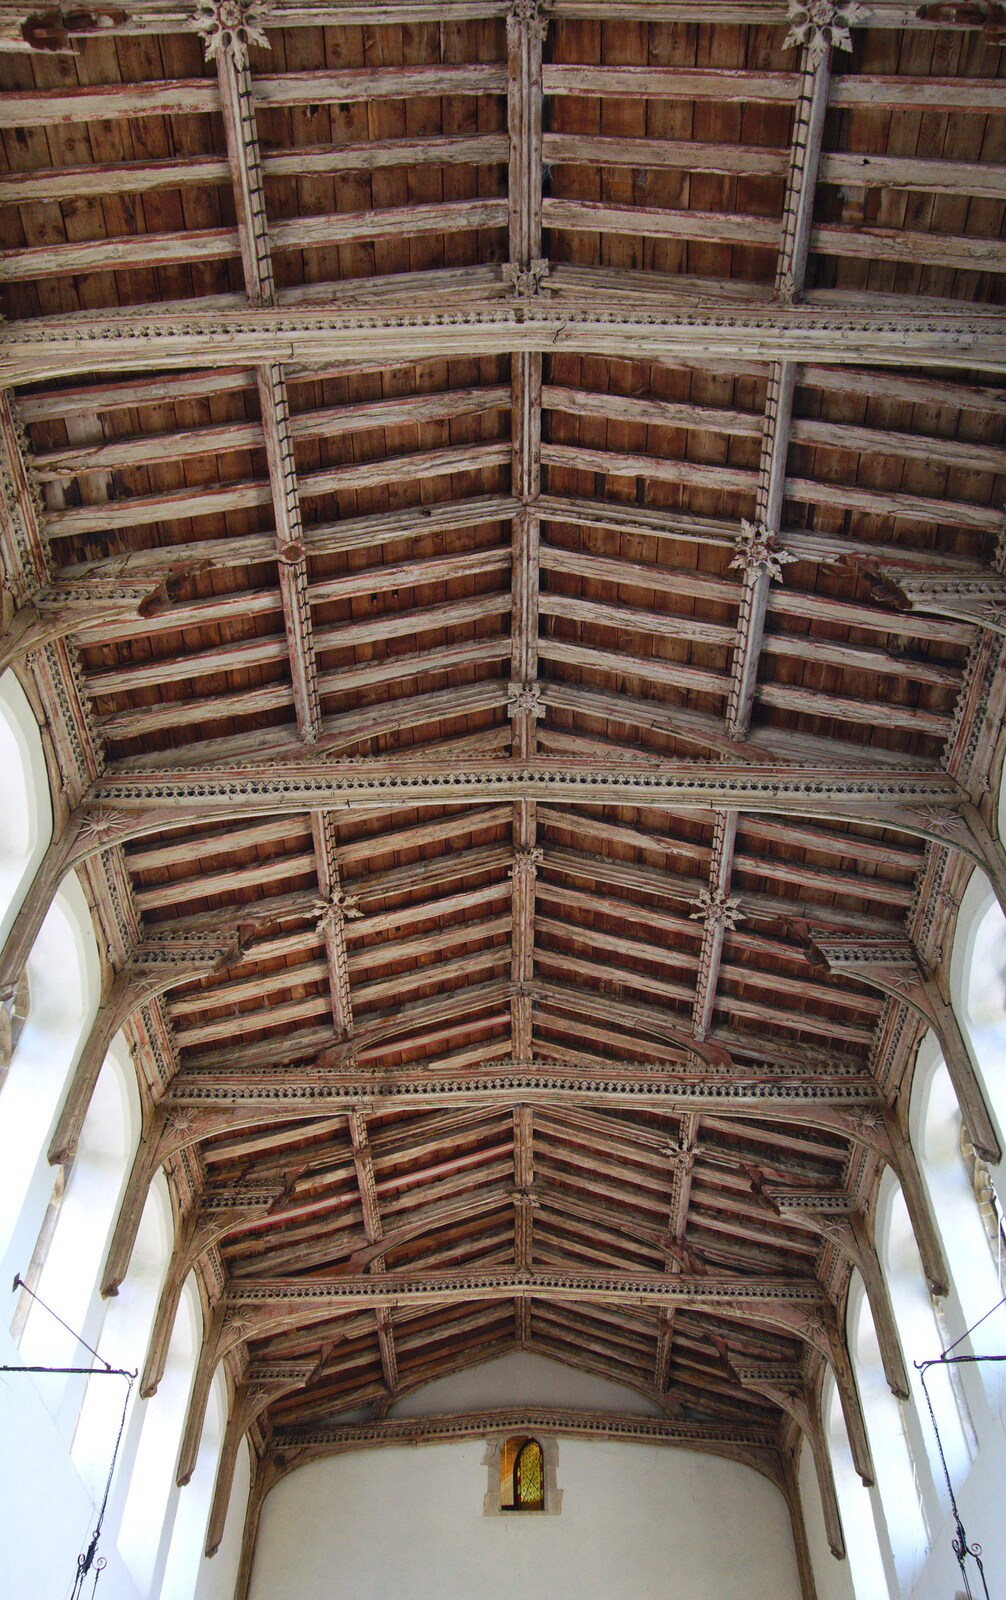 A nice church roof from The Gislingham Silver Band at Walsham Le Willows, Suffolk - 26th August 2019